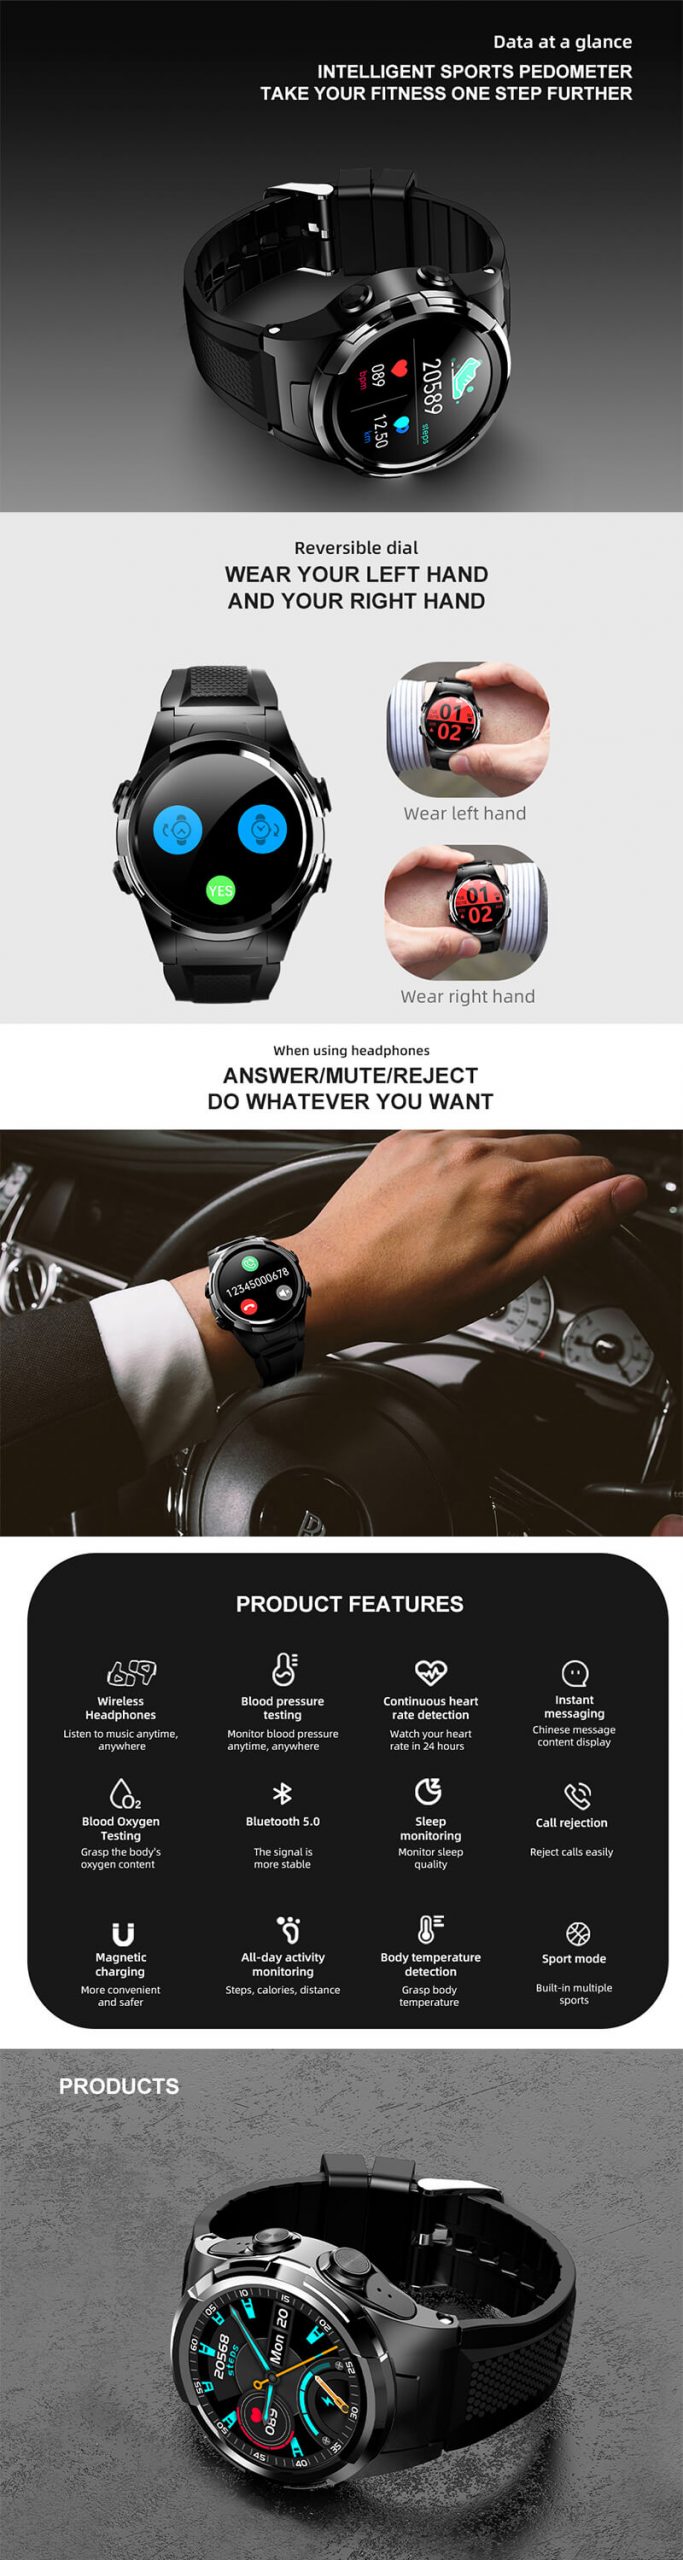 Fitness Android Ios Wristband Waterproof 2 In 1 Smartwatch S201 Smart Watch With Blue tooth Earphones Earbuds